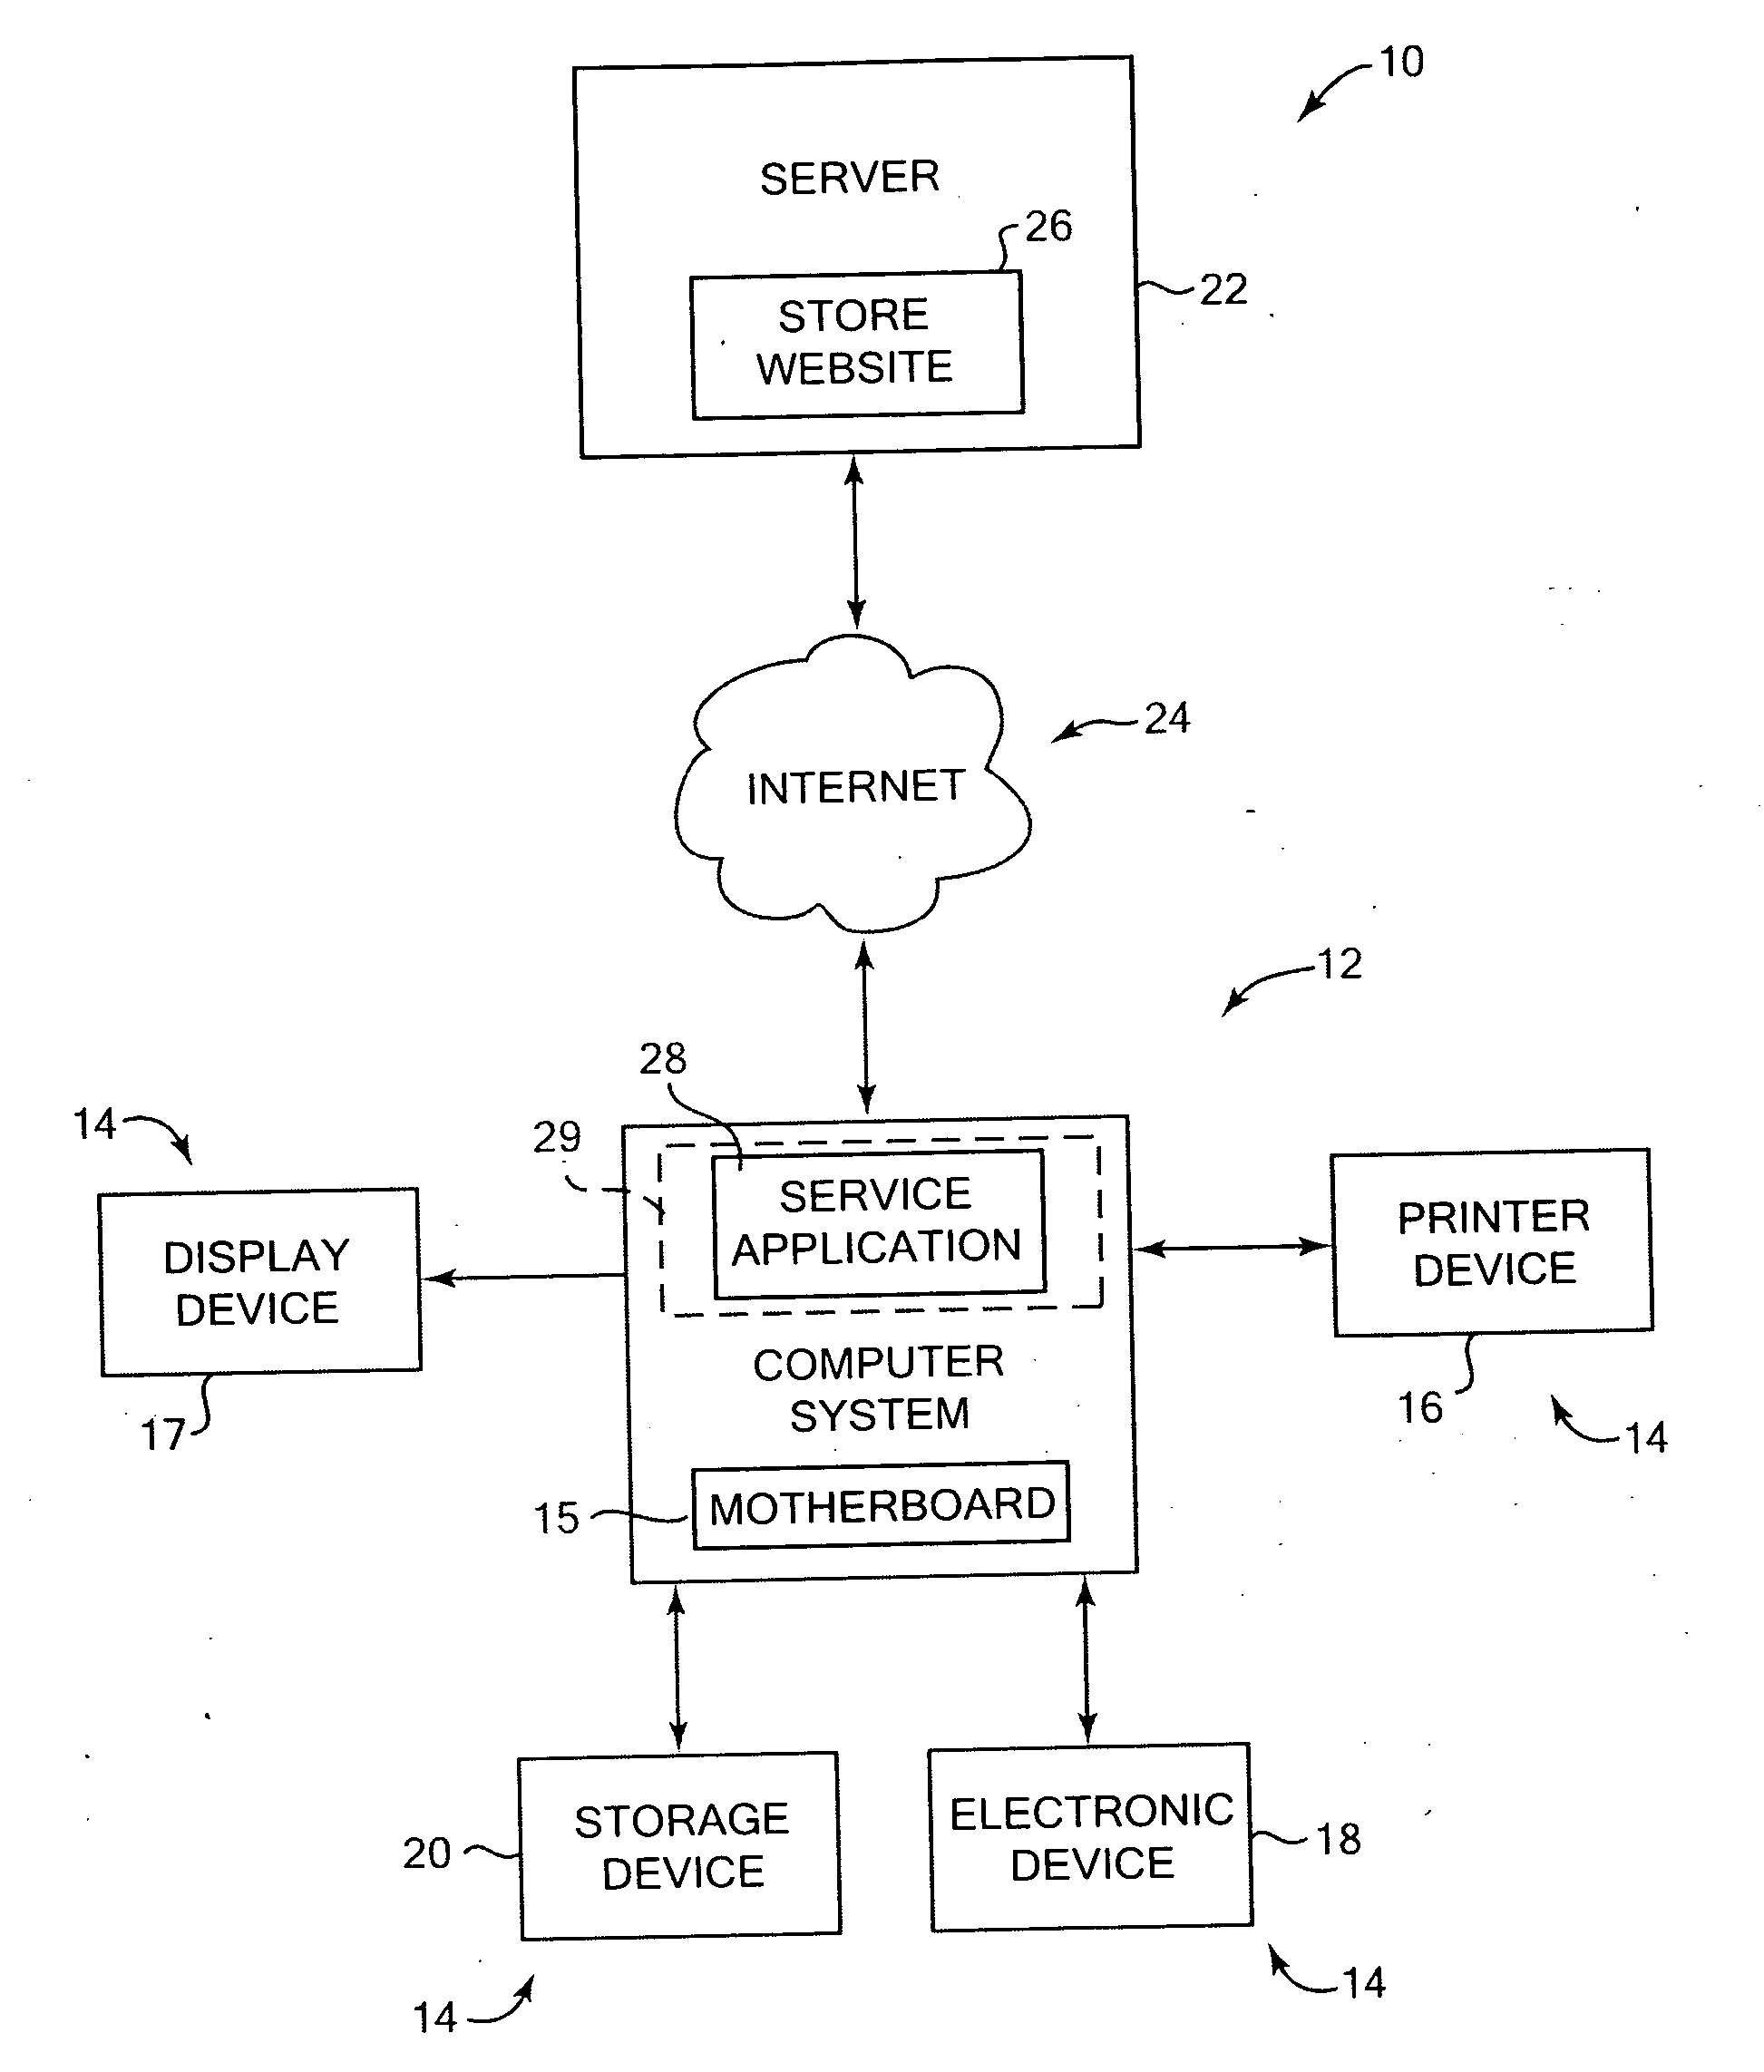 Presenting compatible components and system conditions for computer devices